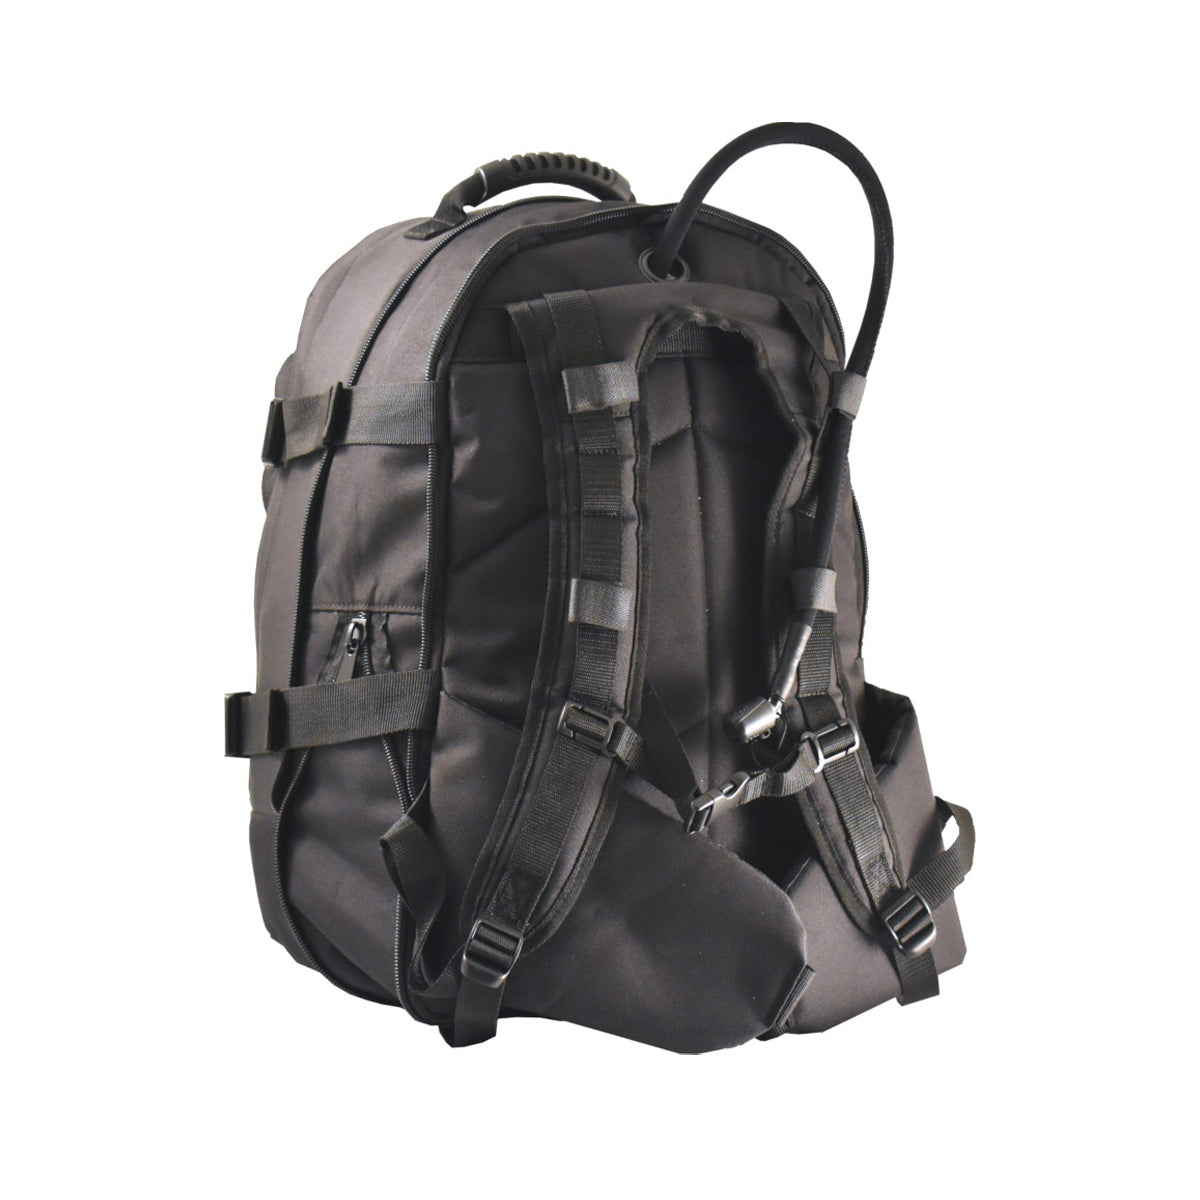 3 Day Jaunt expandable backpack w/ Hydration, Black